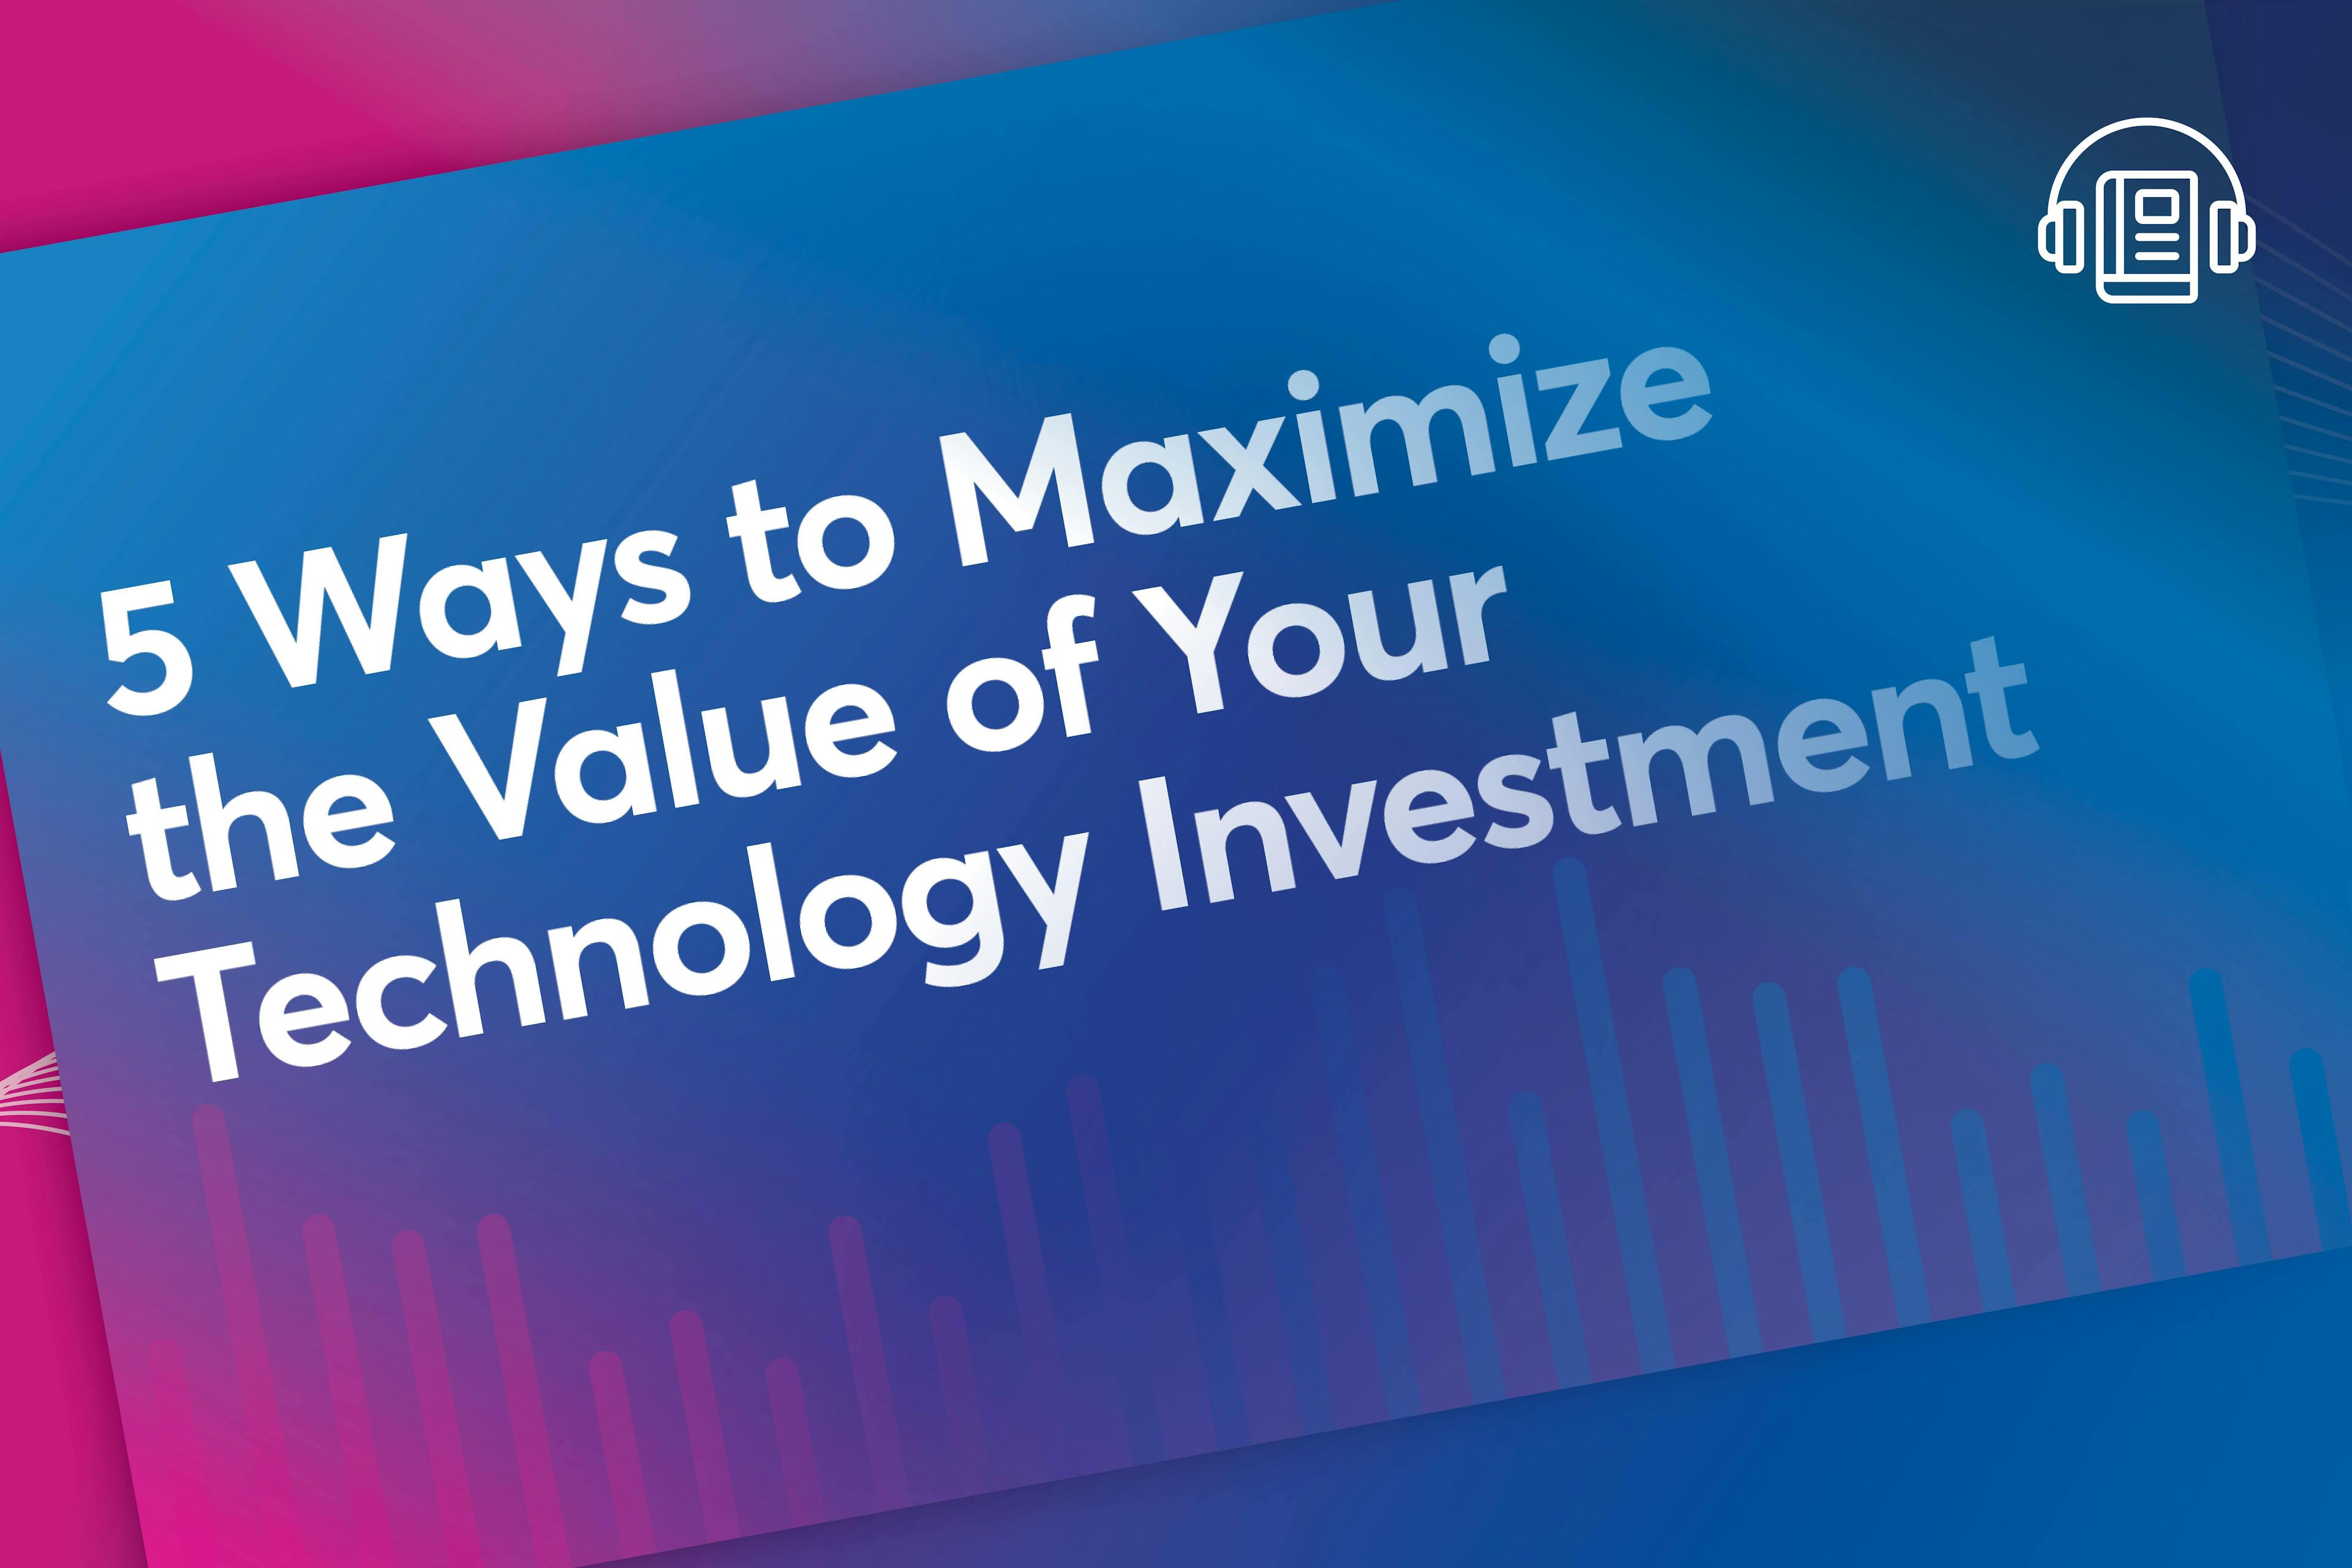 5 Ways to Maximize the Value of Your Technology Investment